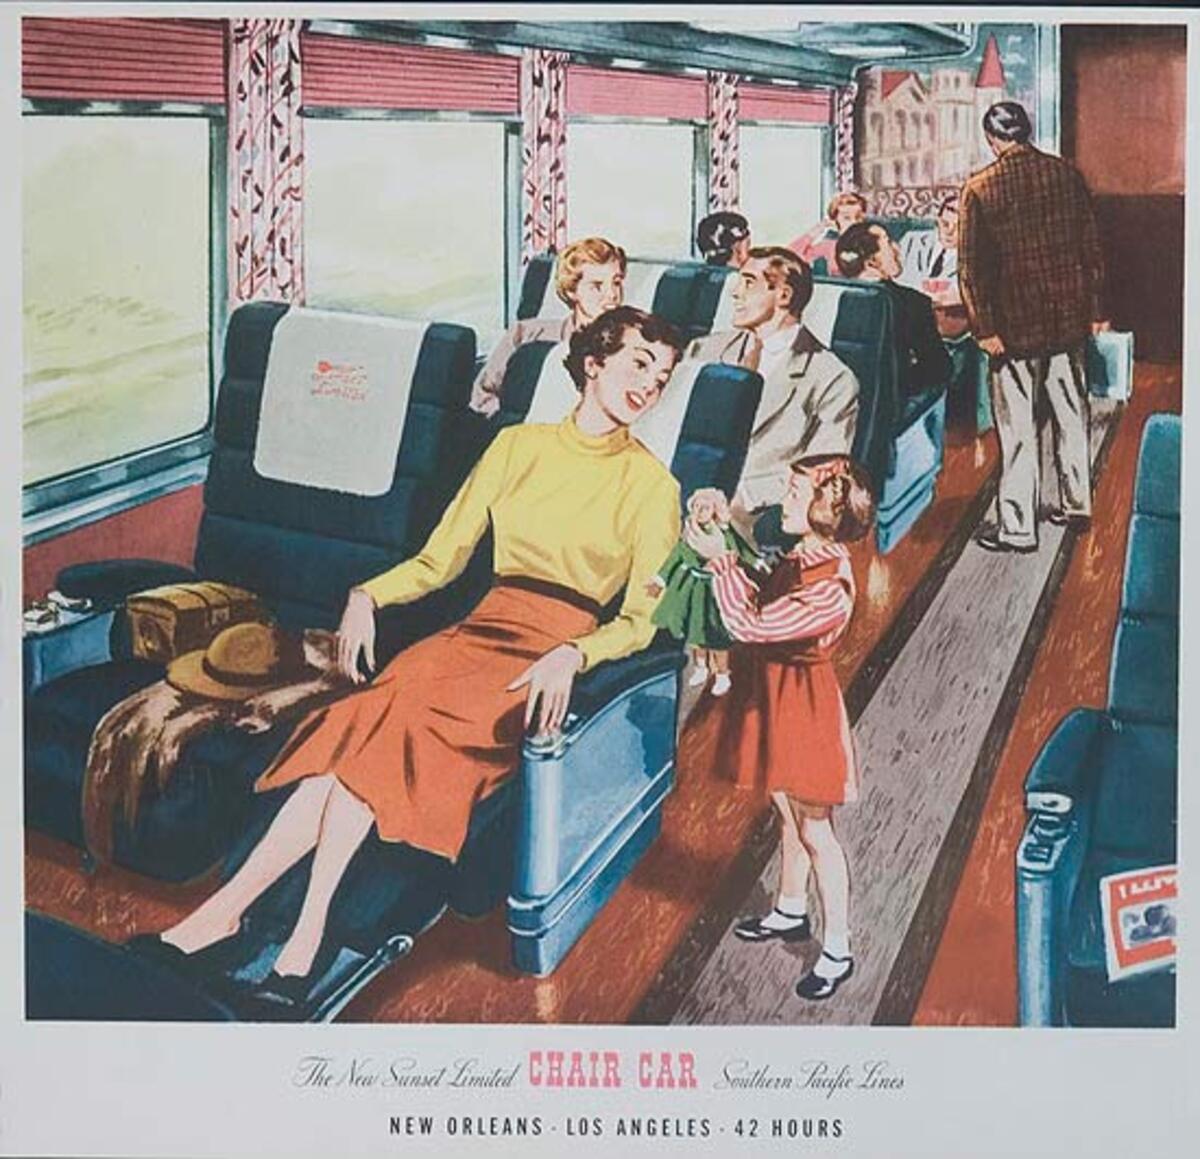 Southern Pacific Lines Pride of Texas Coffee Shop Travel Poster